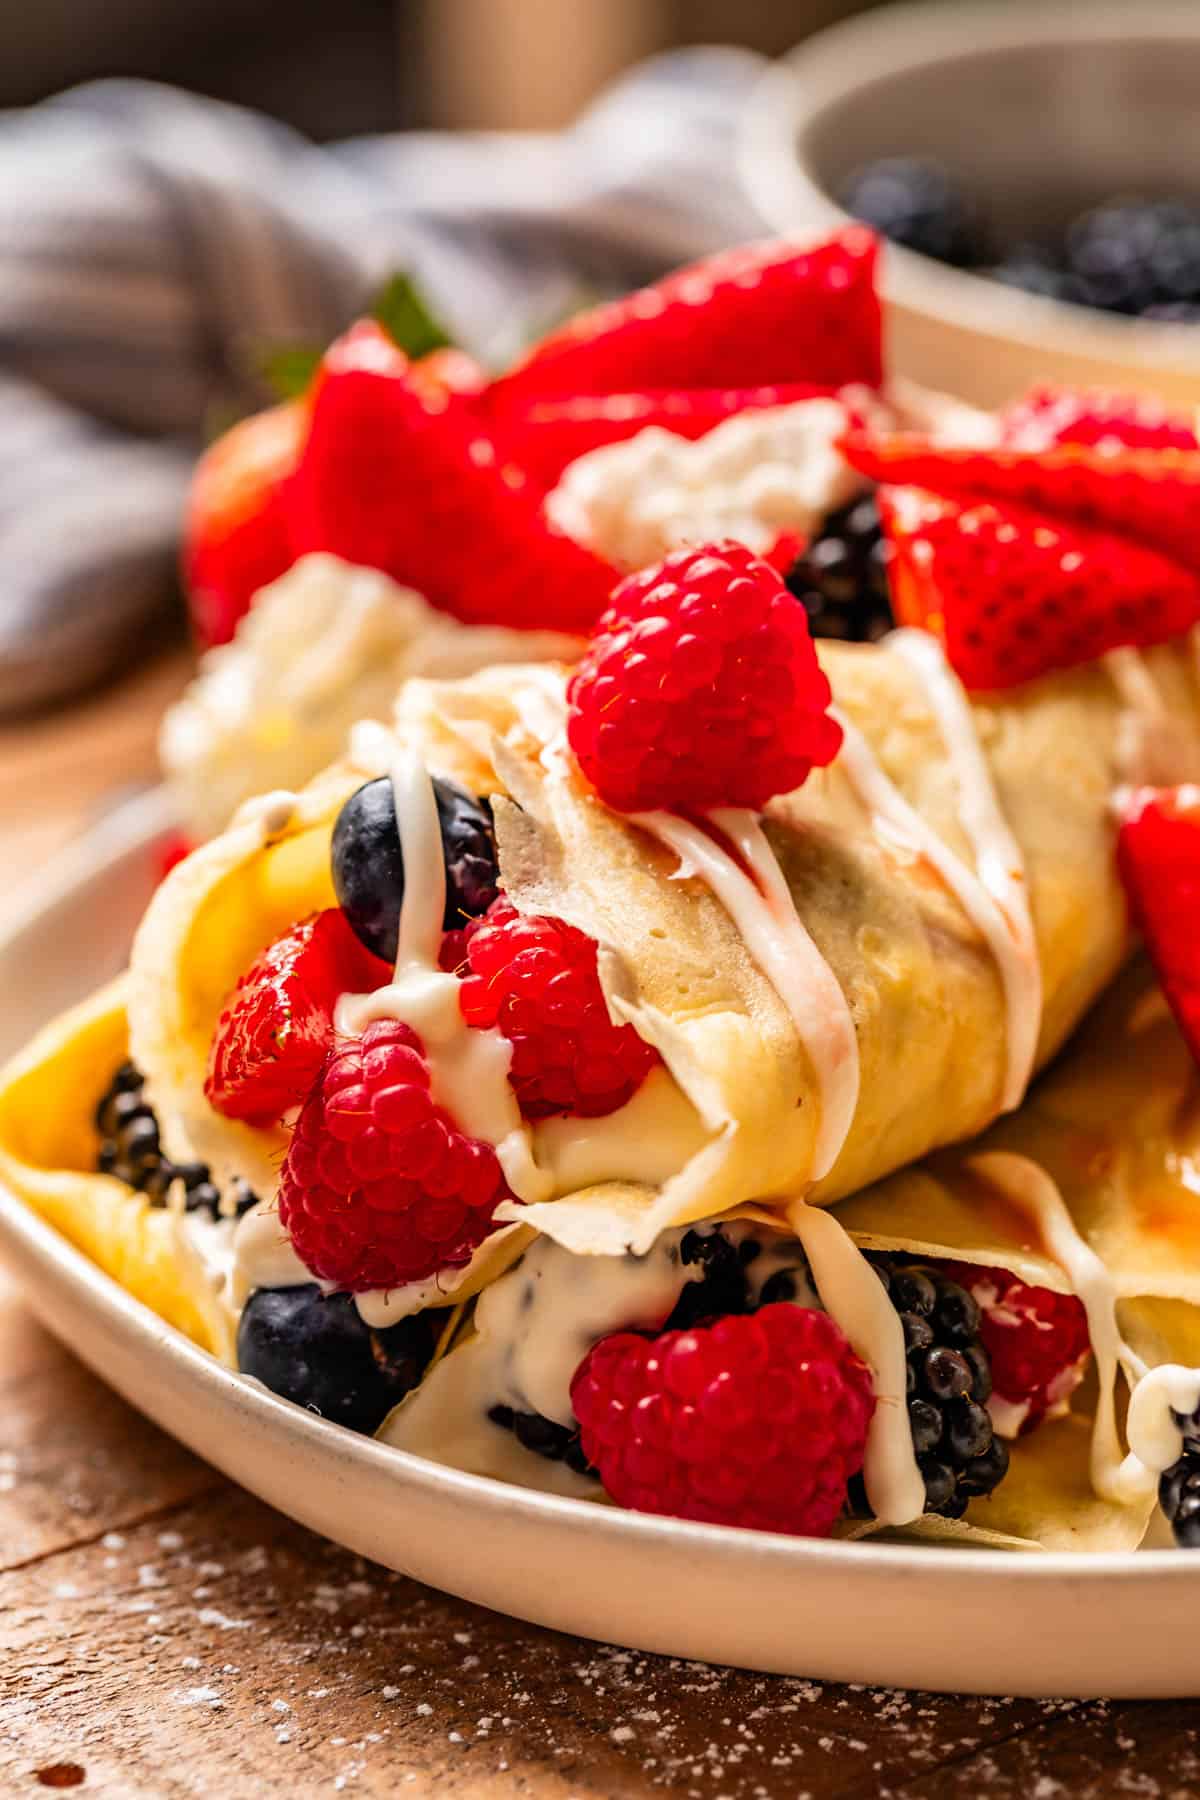 crepes filled burrito style with cream cheese spread and fresh mixed berries.